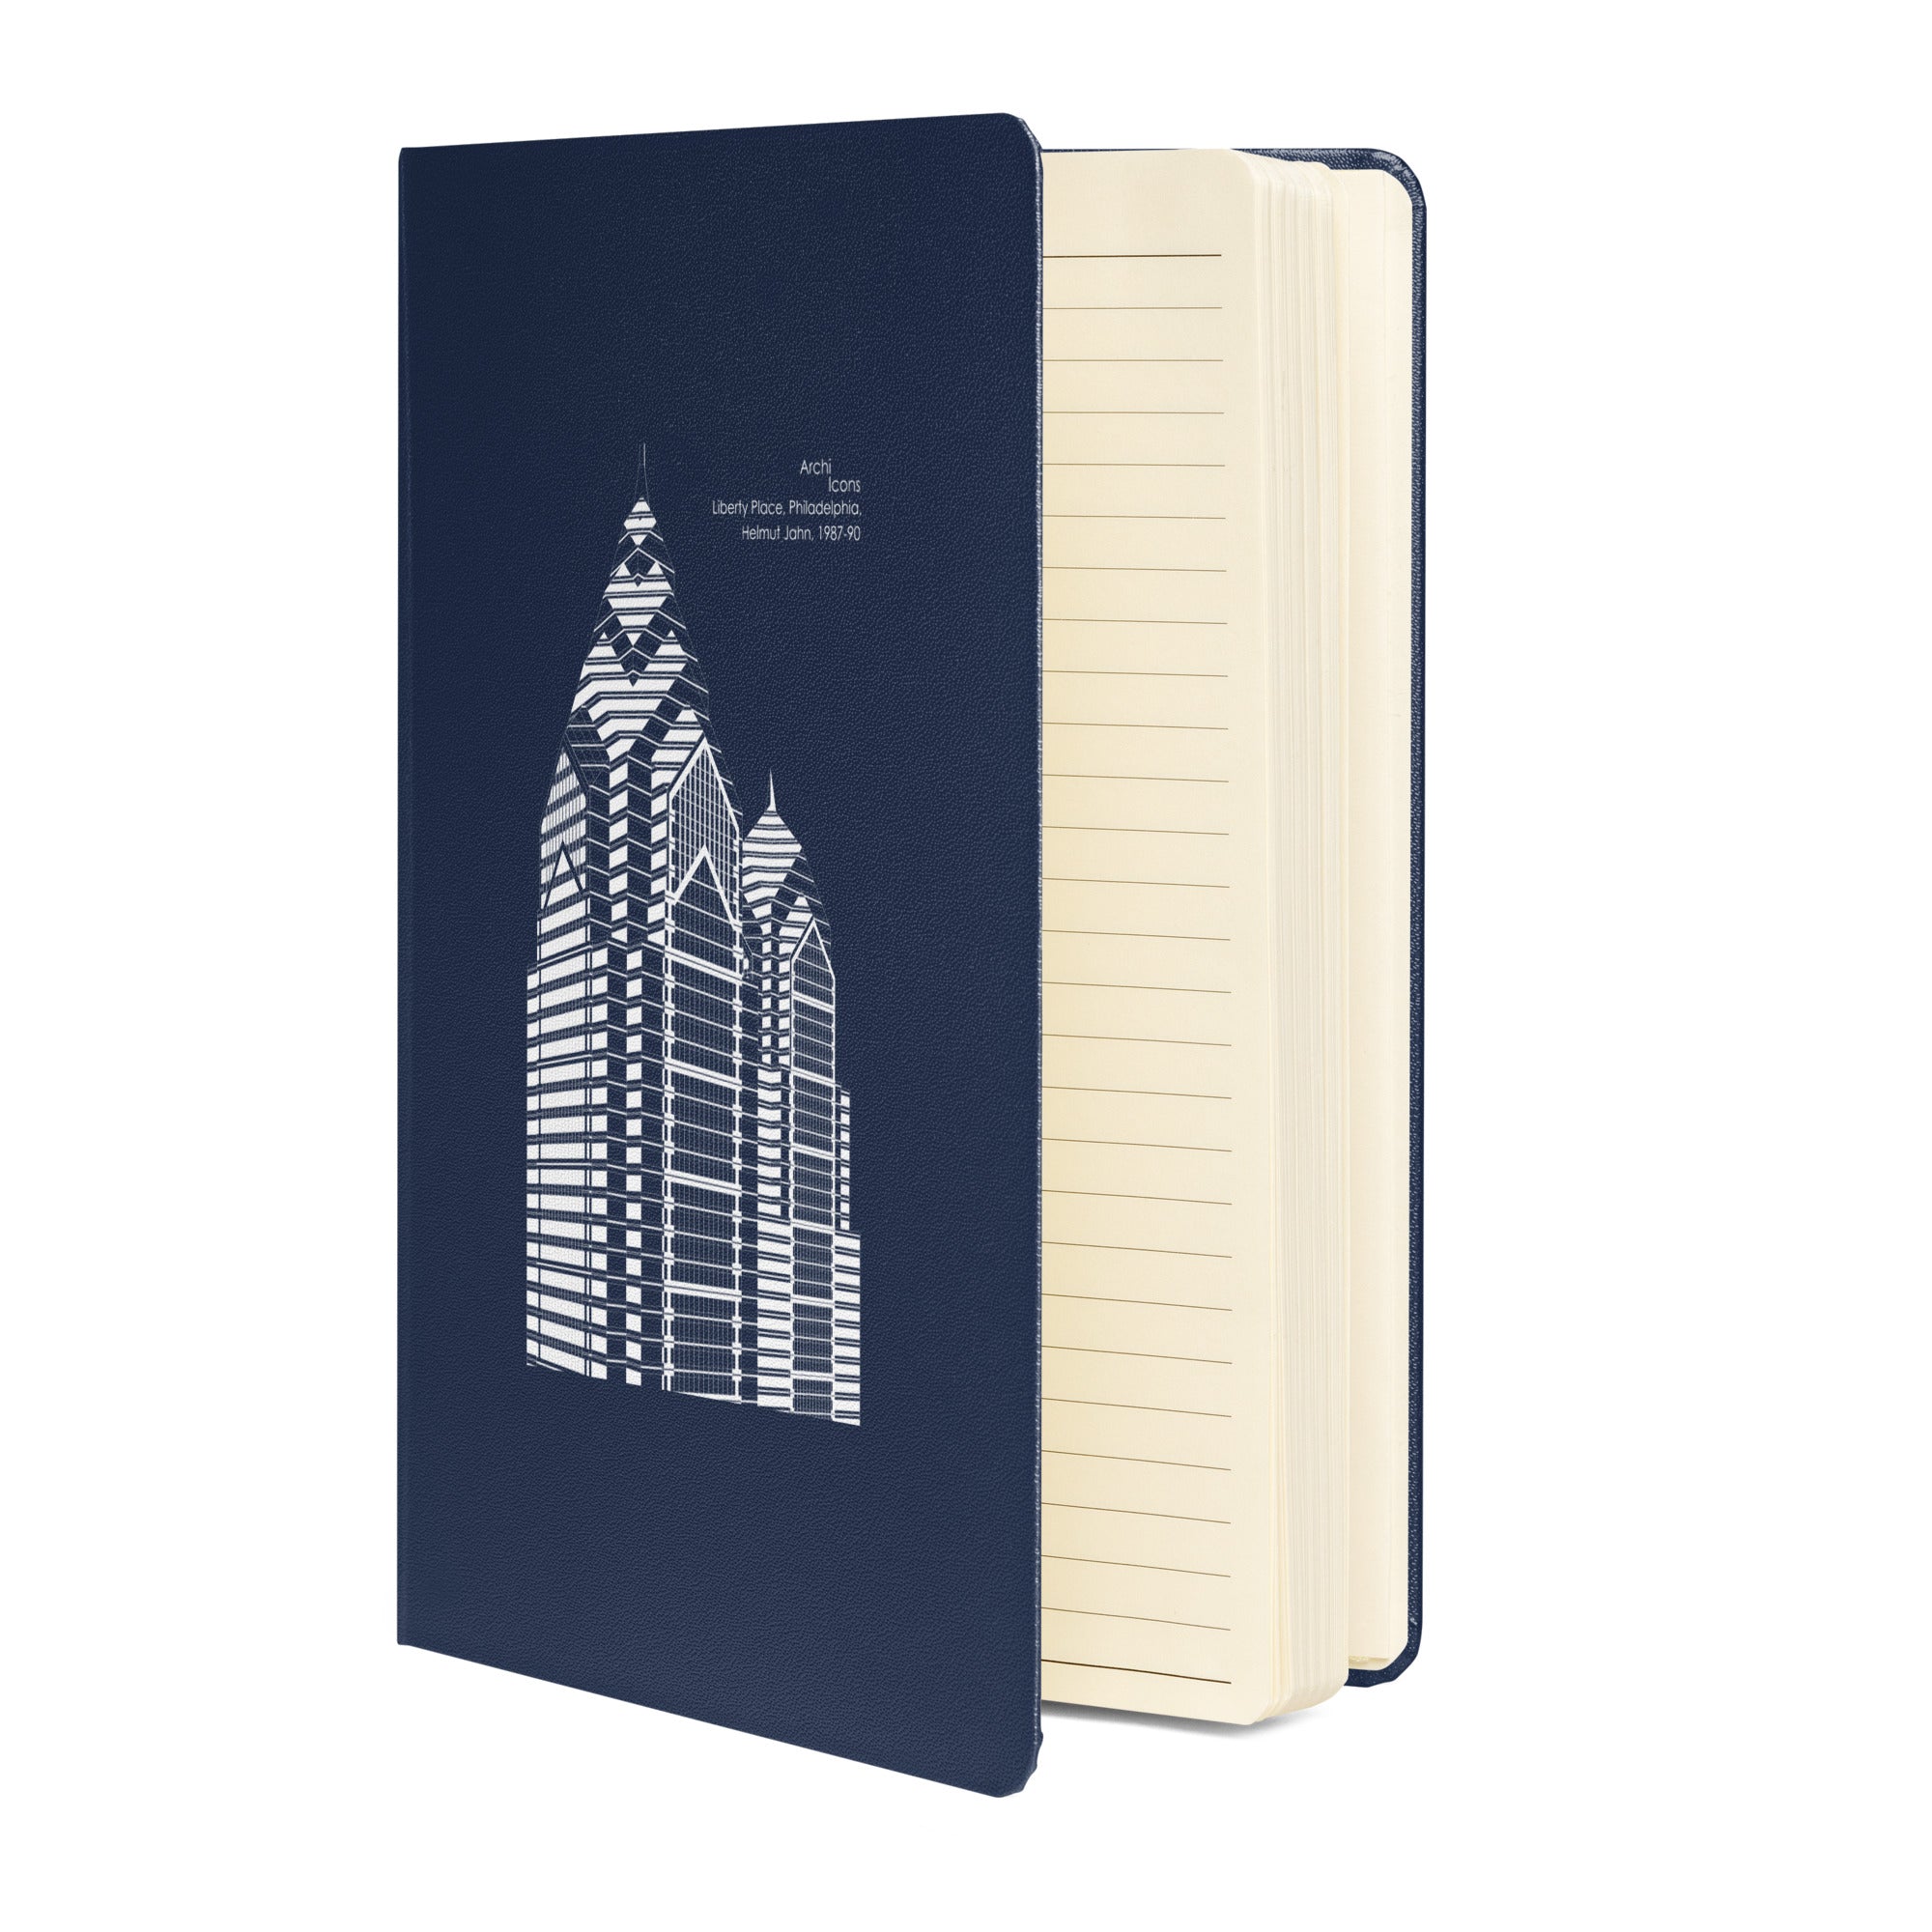 Liberty Place Hardcover Notebook